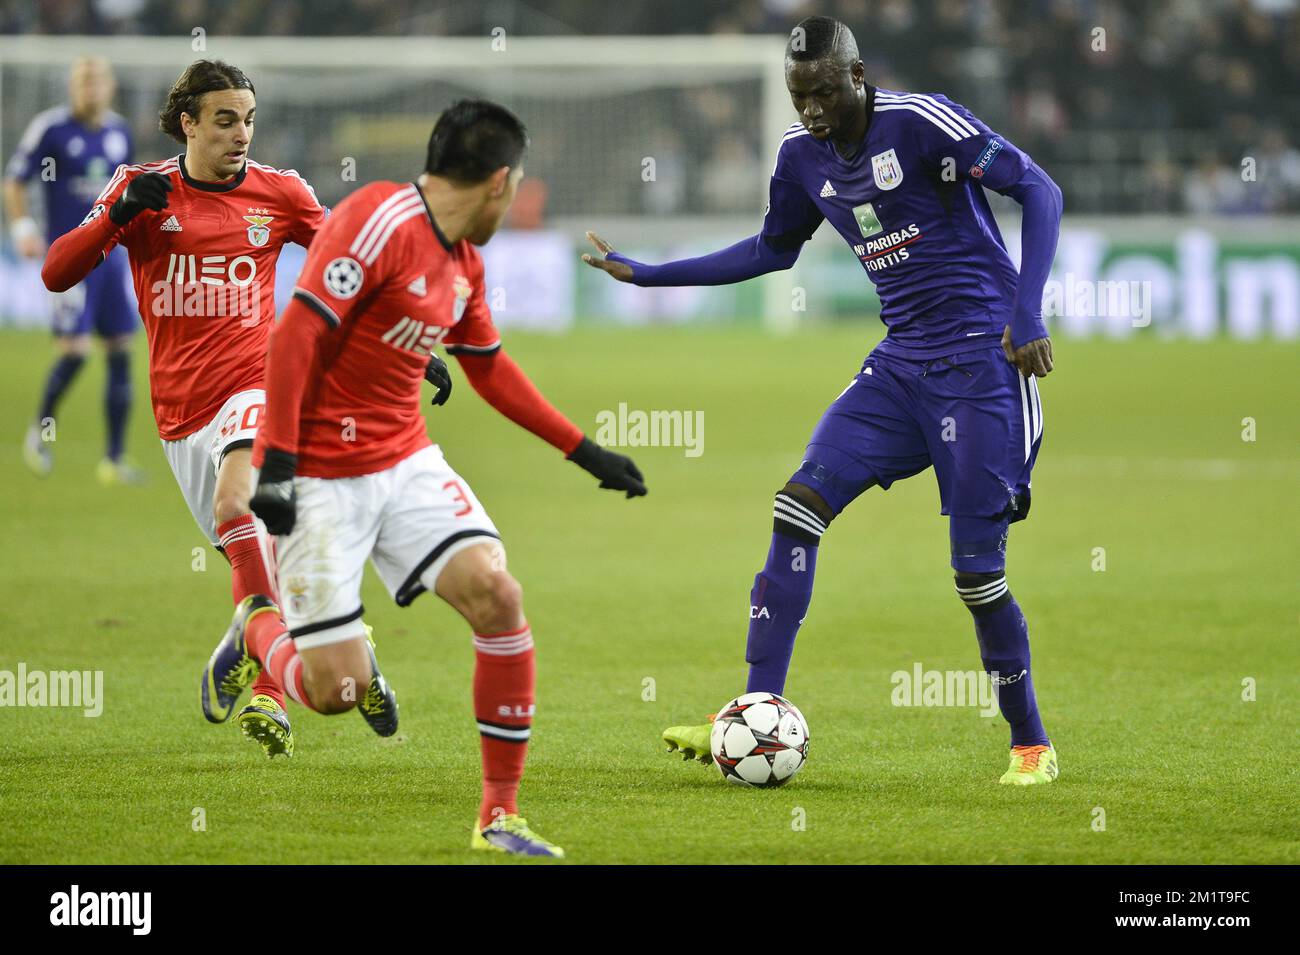 20131127 - BRUSSELS, BELGIUM: Benfica's Enzo Perez and Anderlecht's Cheikhou Kouyate fight for the ball during the soccer game between Belgian team RSC Anderlecht and Portuguese club S.L. Benfica, the fifth match of the Champions League Group stage, in the group C Wednesday 27 November 2013 in Brussels. BELGA PHOTO LAURIE DIEFFEMBACQ Stock Photo